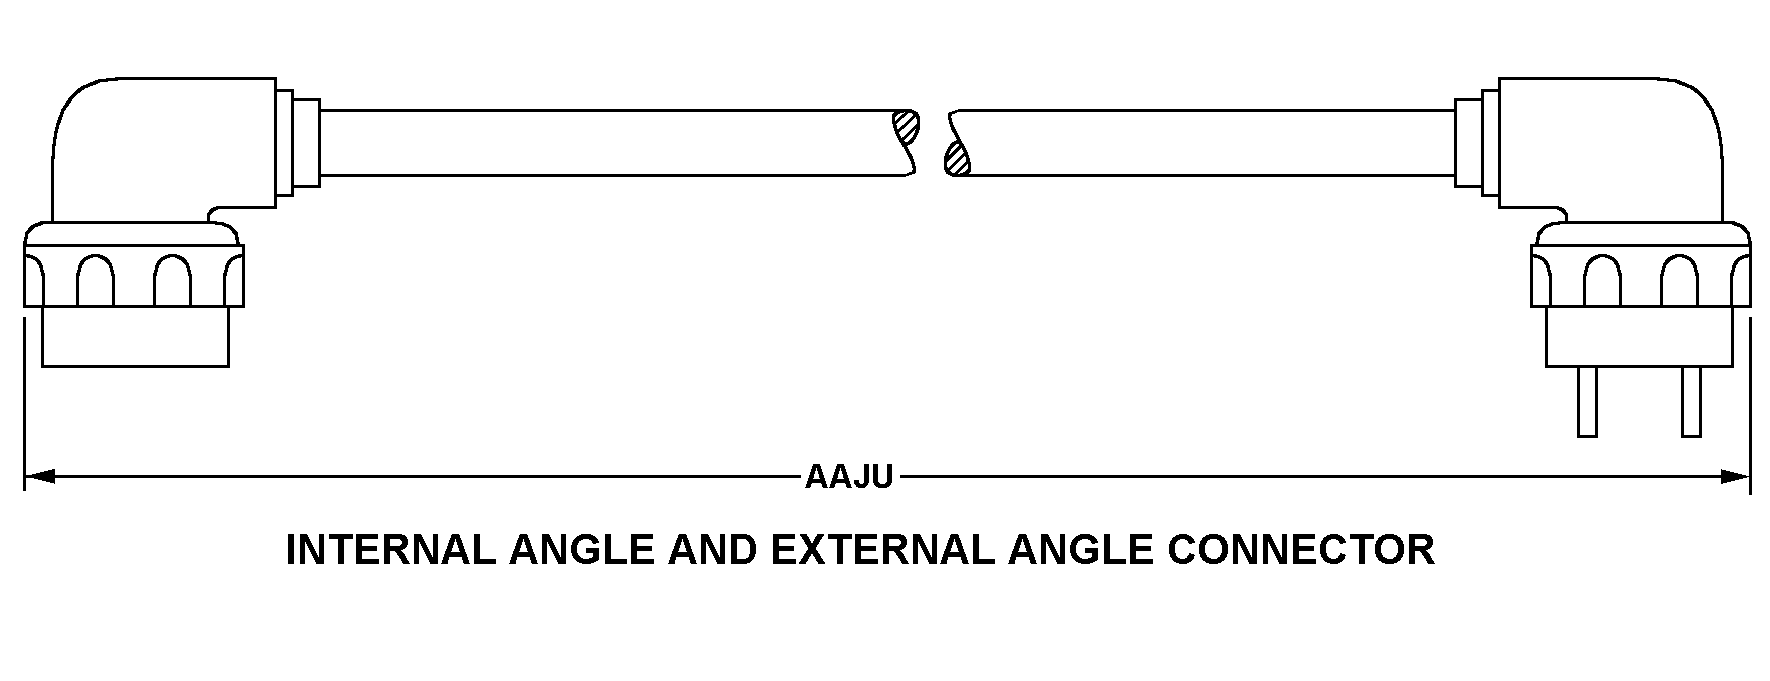 INTERNAL ANGLE AND EXTERNAL ANGLE CONNECTOR style nsn 5995-01-411-7436